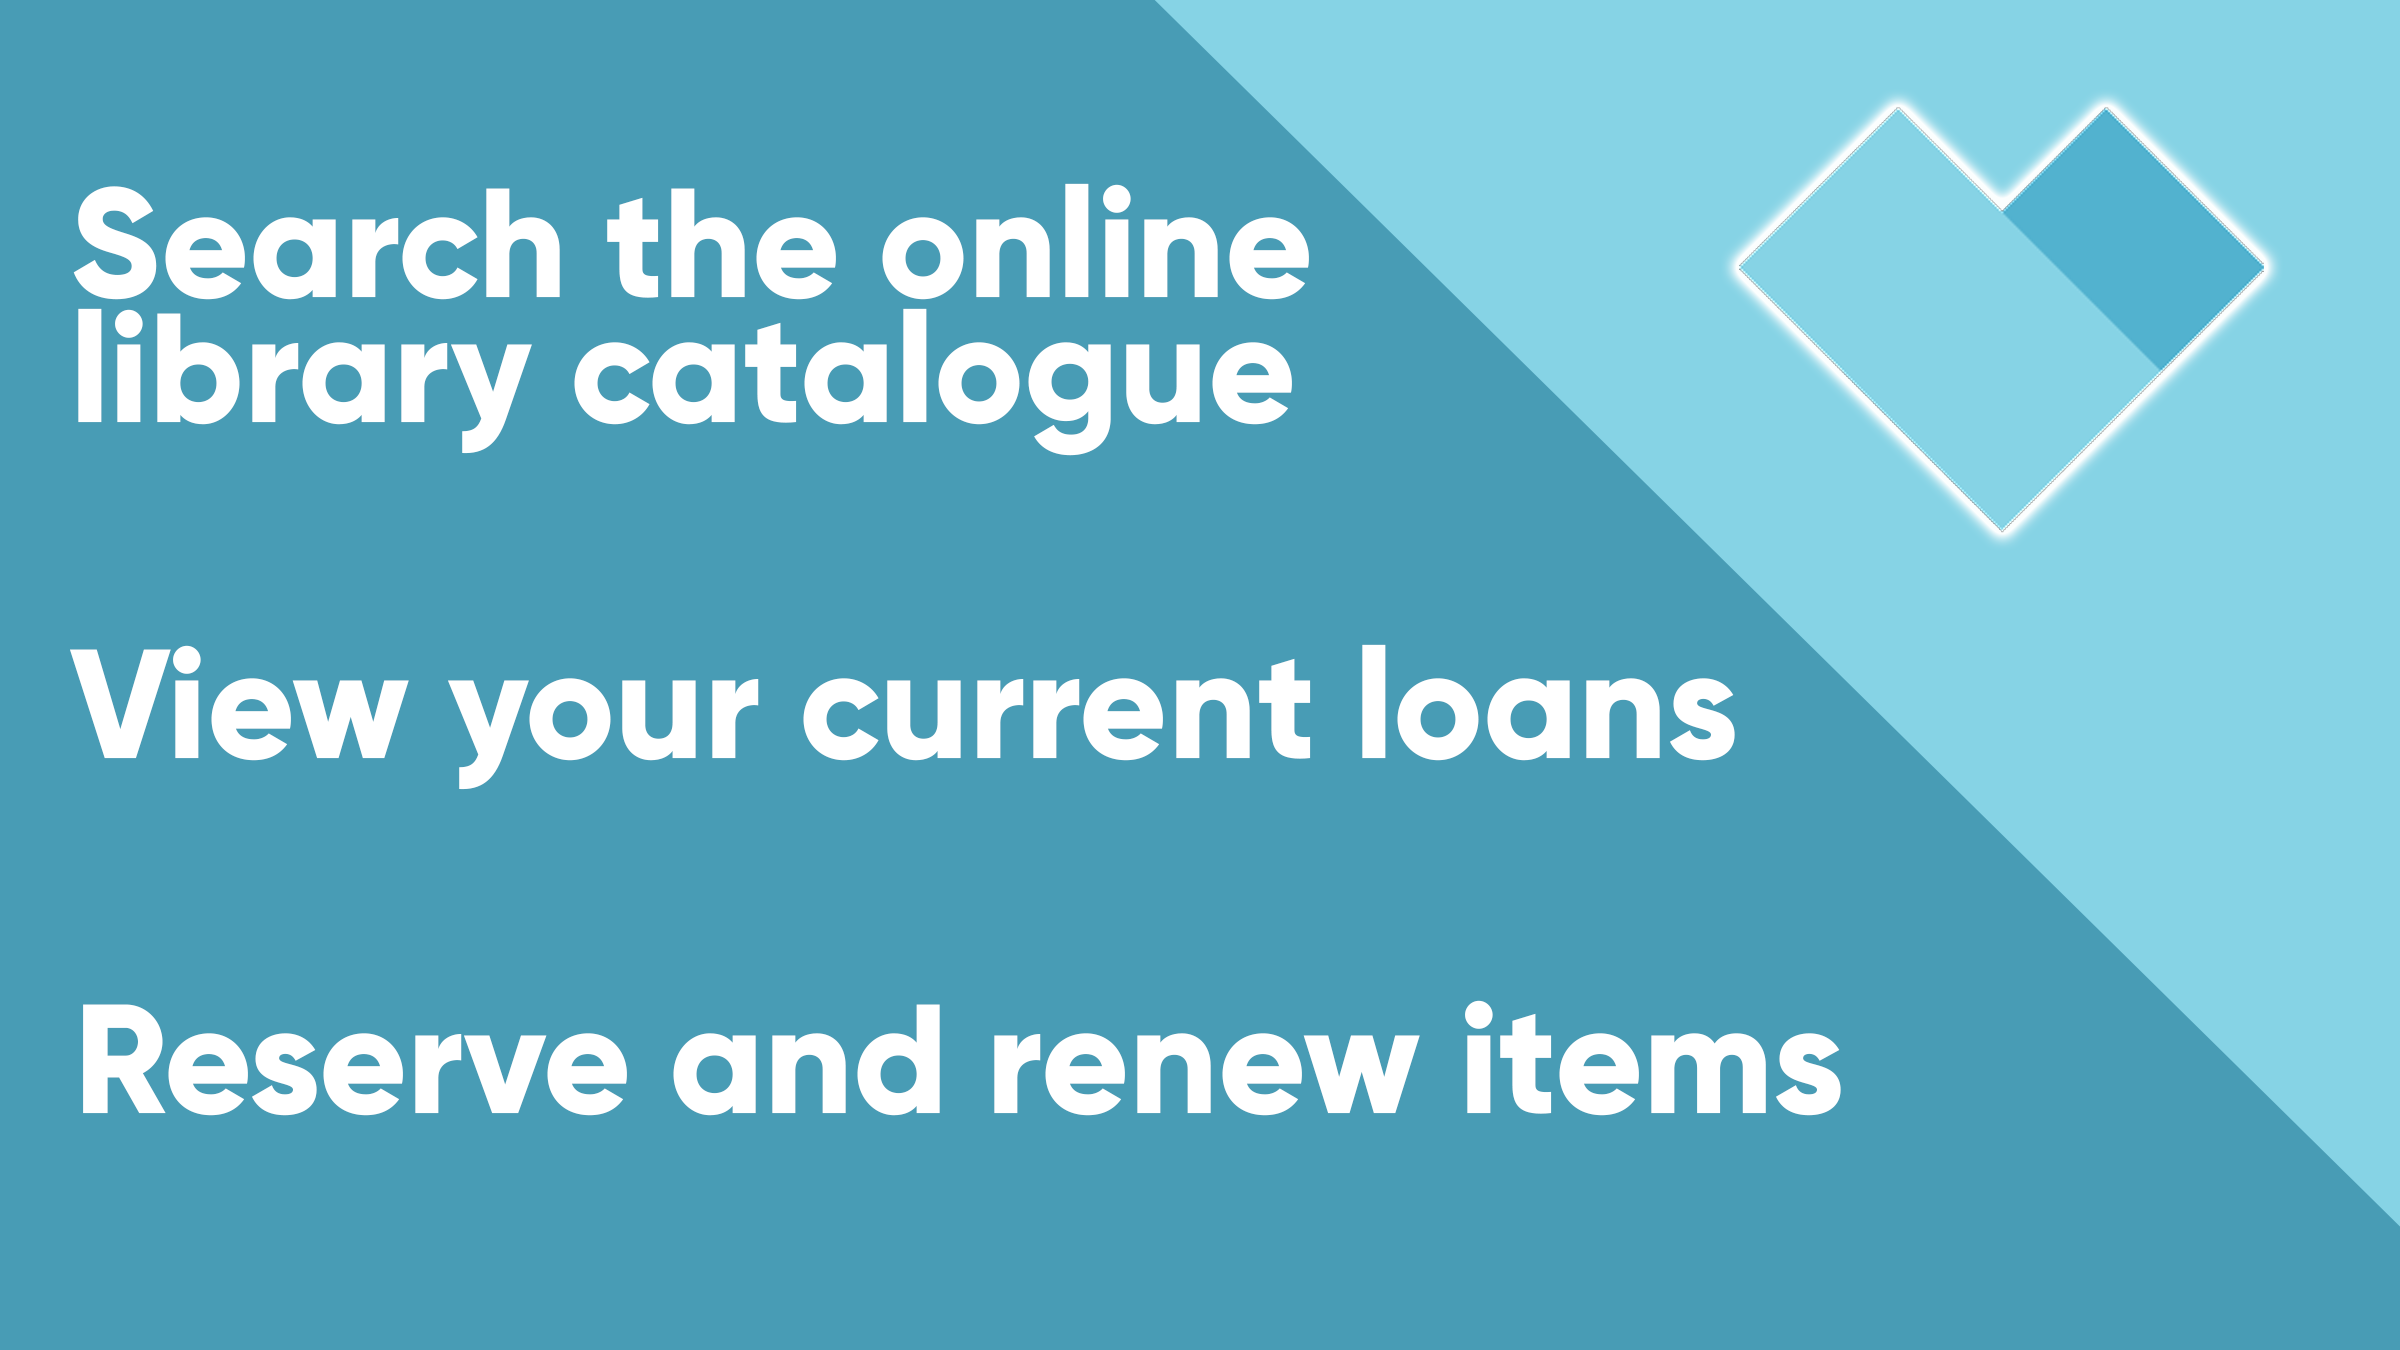 Search the online library catalogue, view your current loans, reserve and renew items.